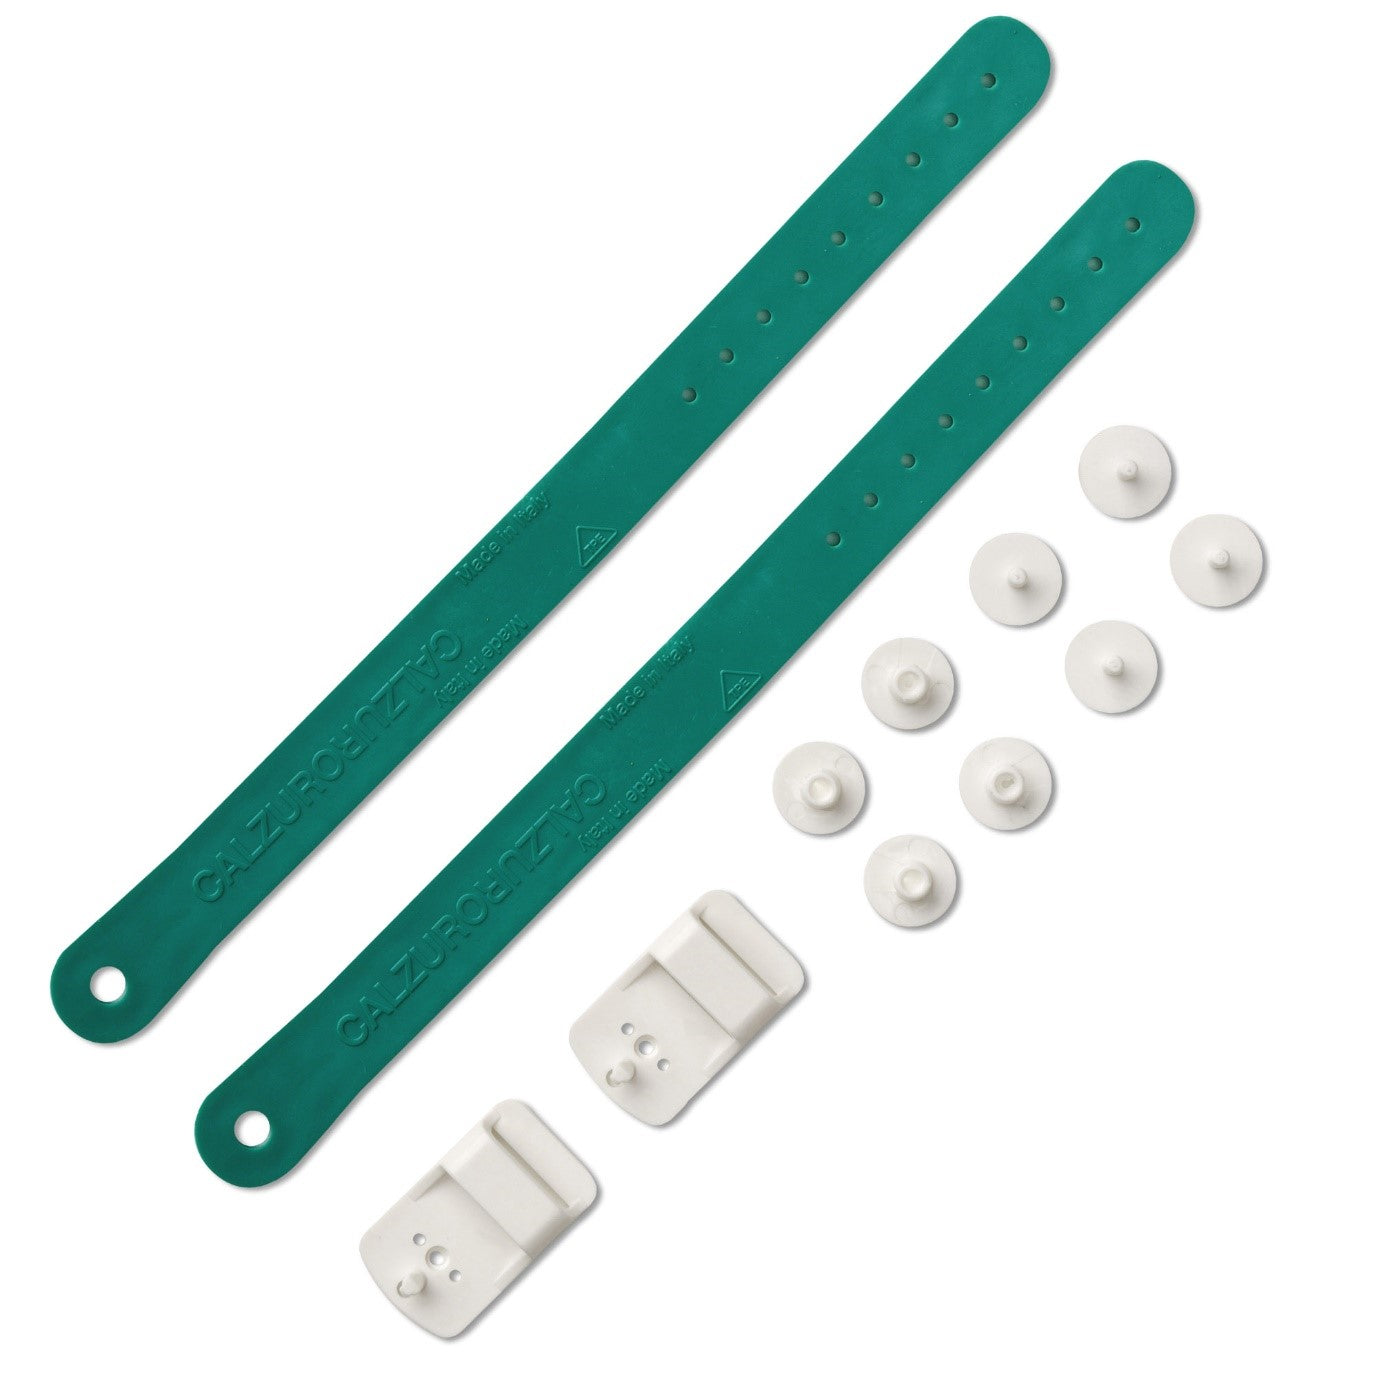 Heel Straps Kit for Calzuro Classic Clogs - Green